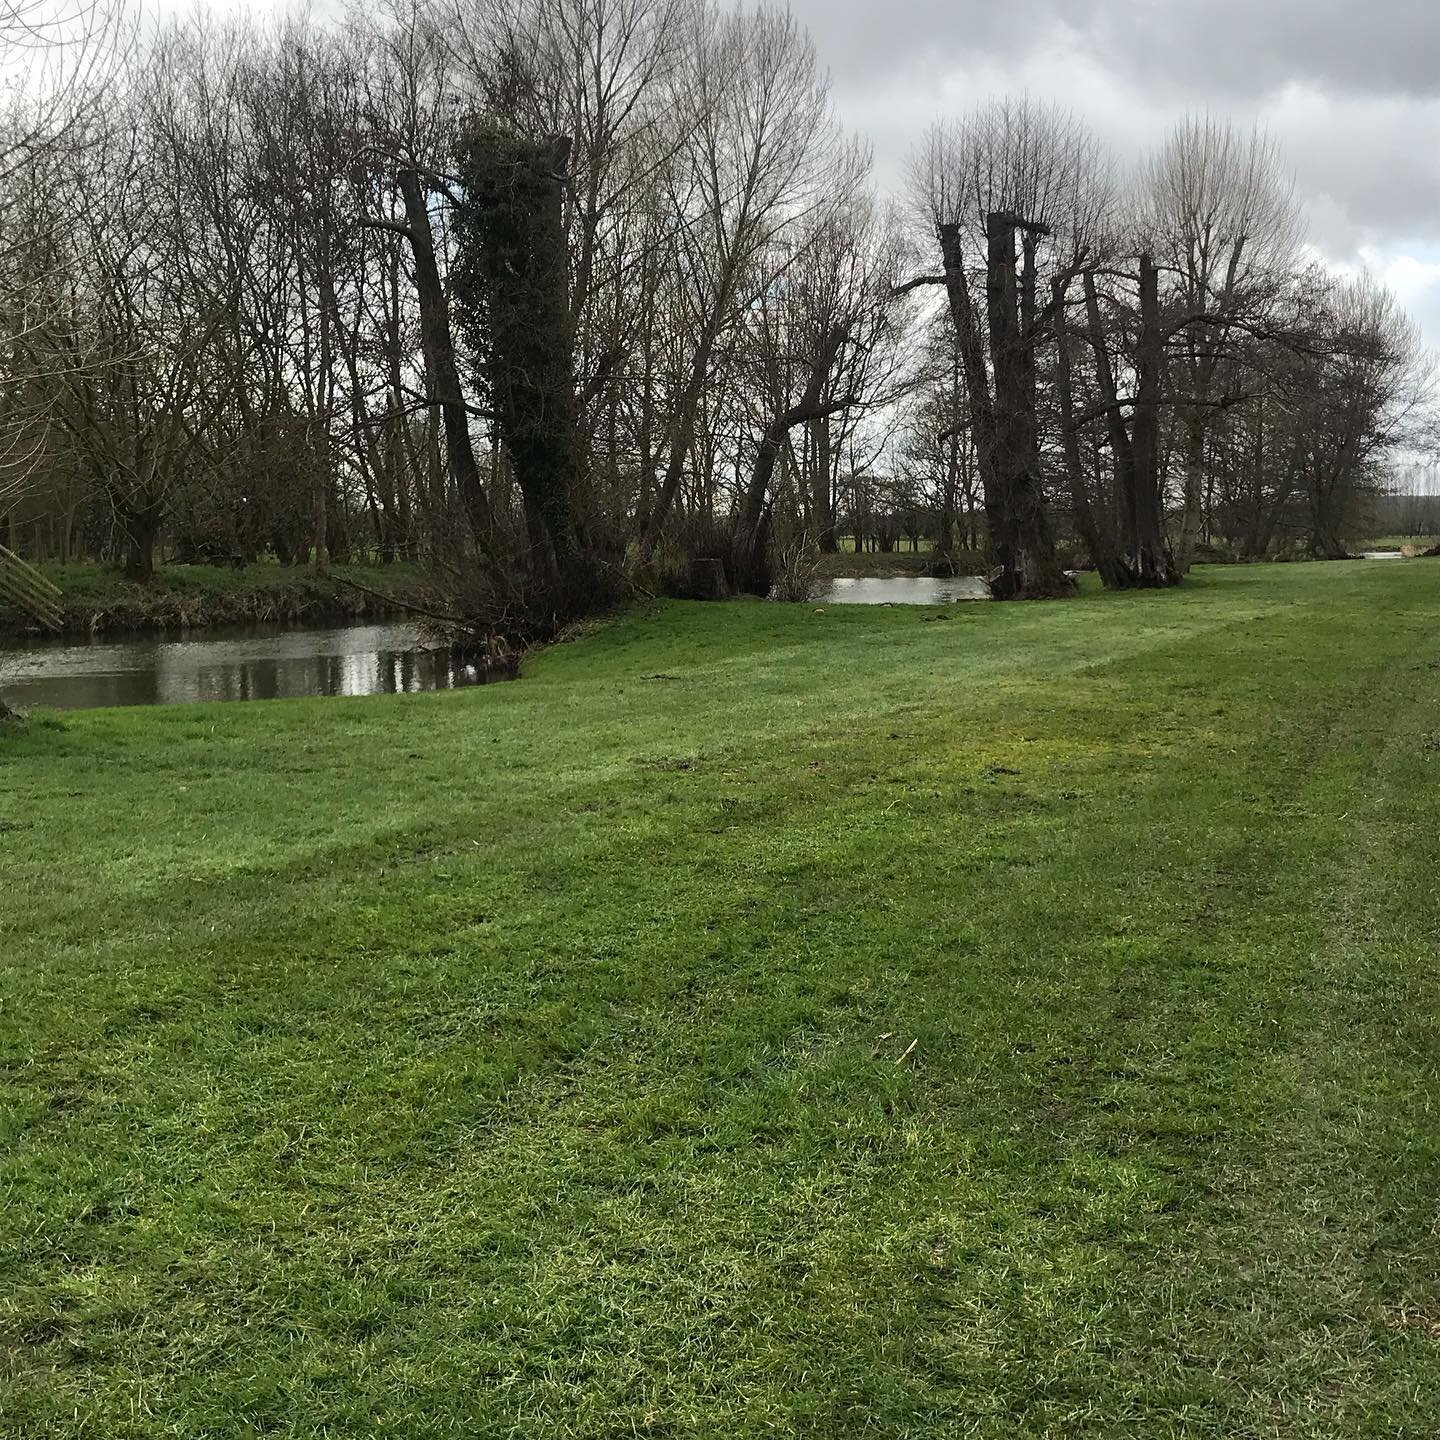 Our campers may not be able to get a trim at the moment but Mark has mowed the site for the first time this year. 2 months before we hope we can open so the hard work on the grounds starts now. Our bookings go live from this Monday. #suffolkcamping #